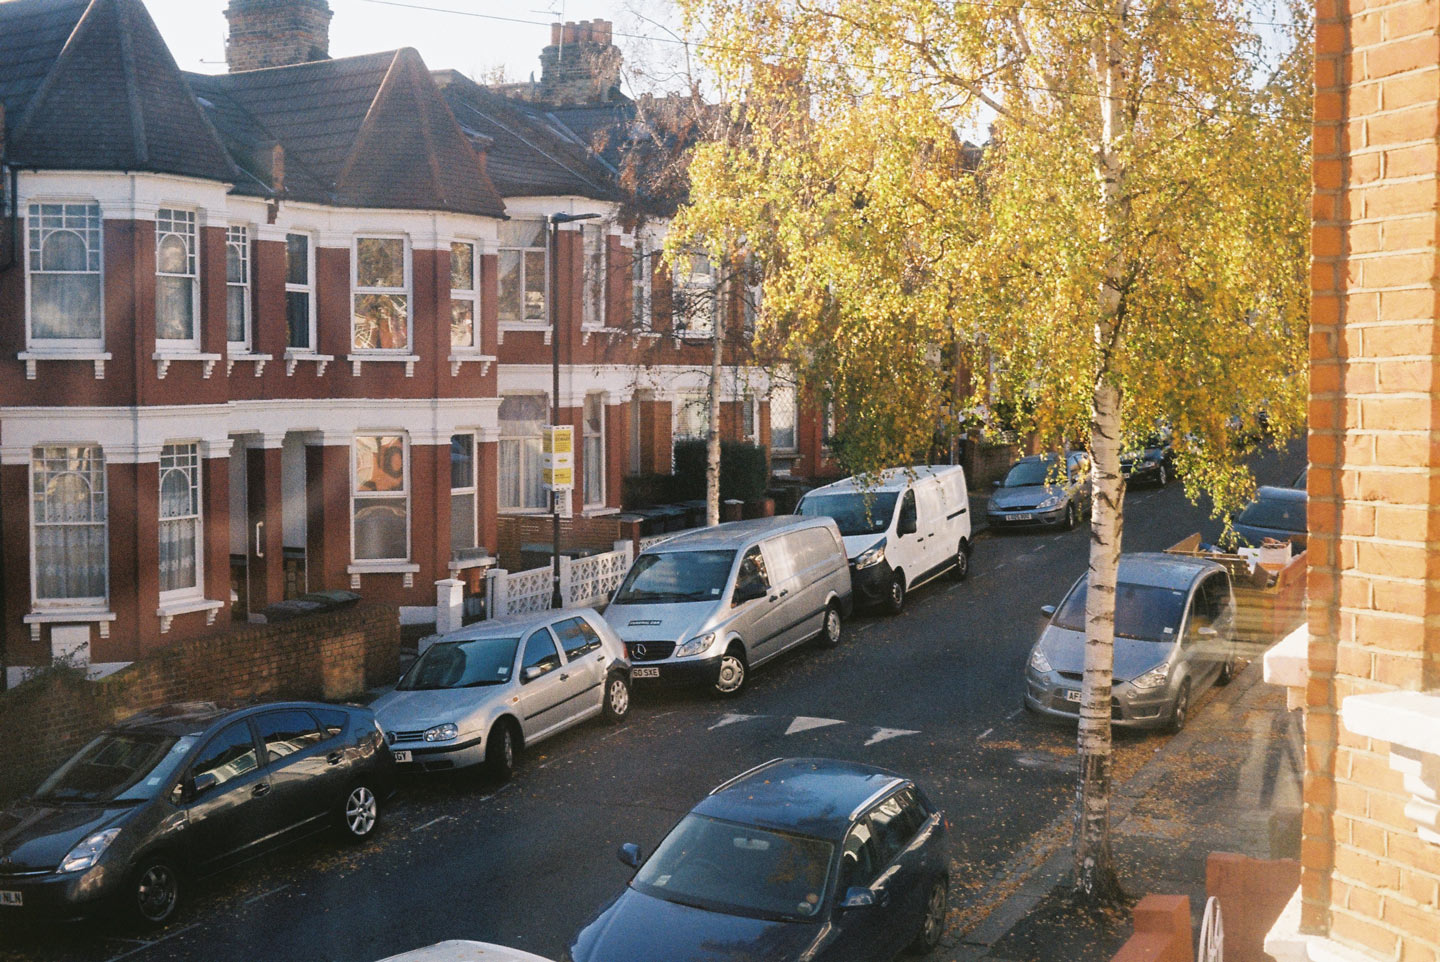 What I see from my window: The Harringay Ladder, North London